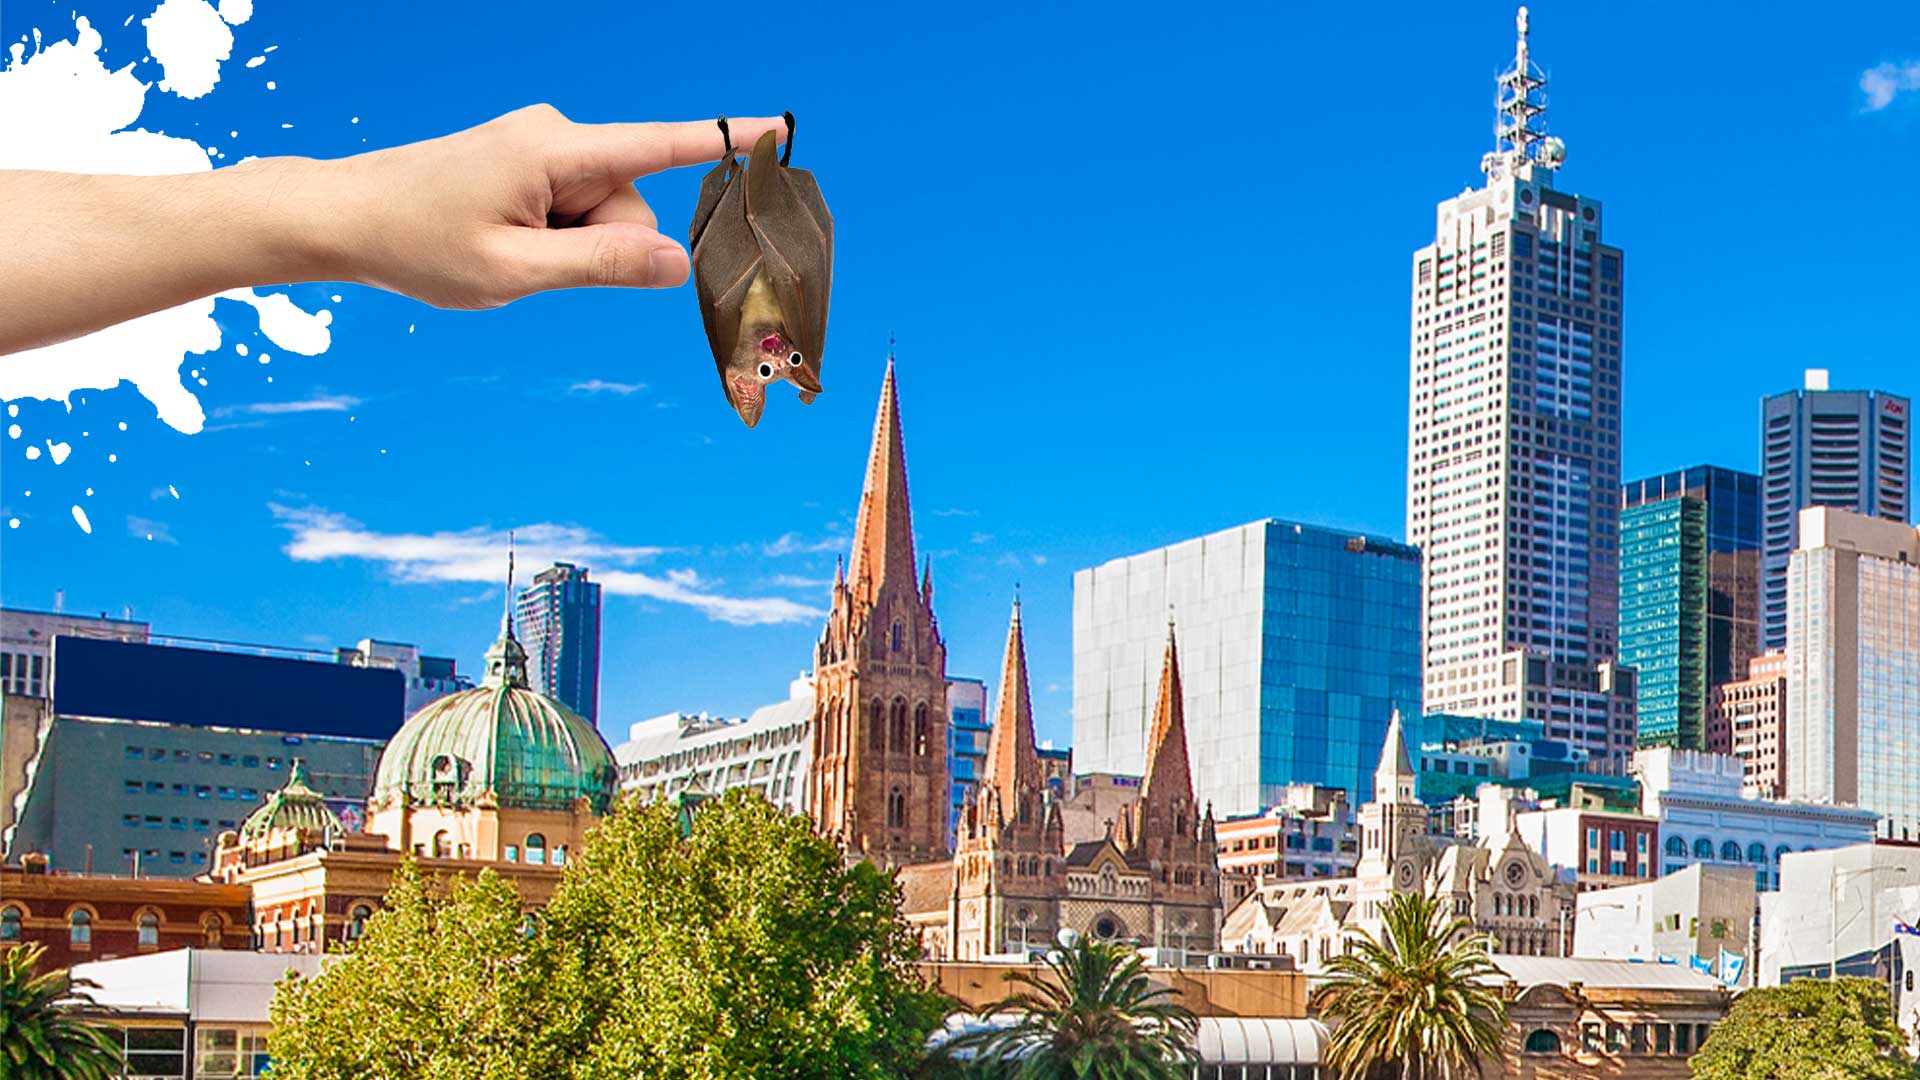 A picture of Melbourne